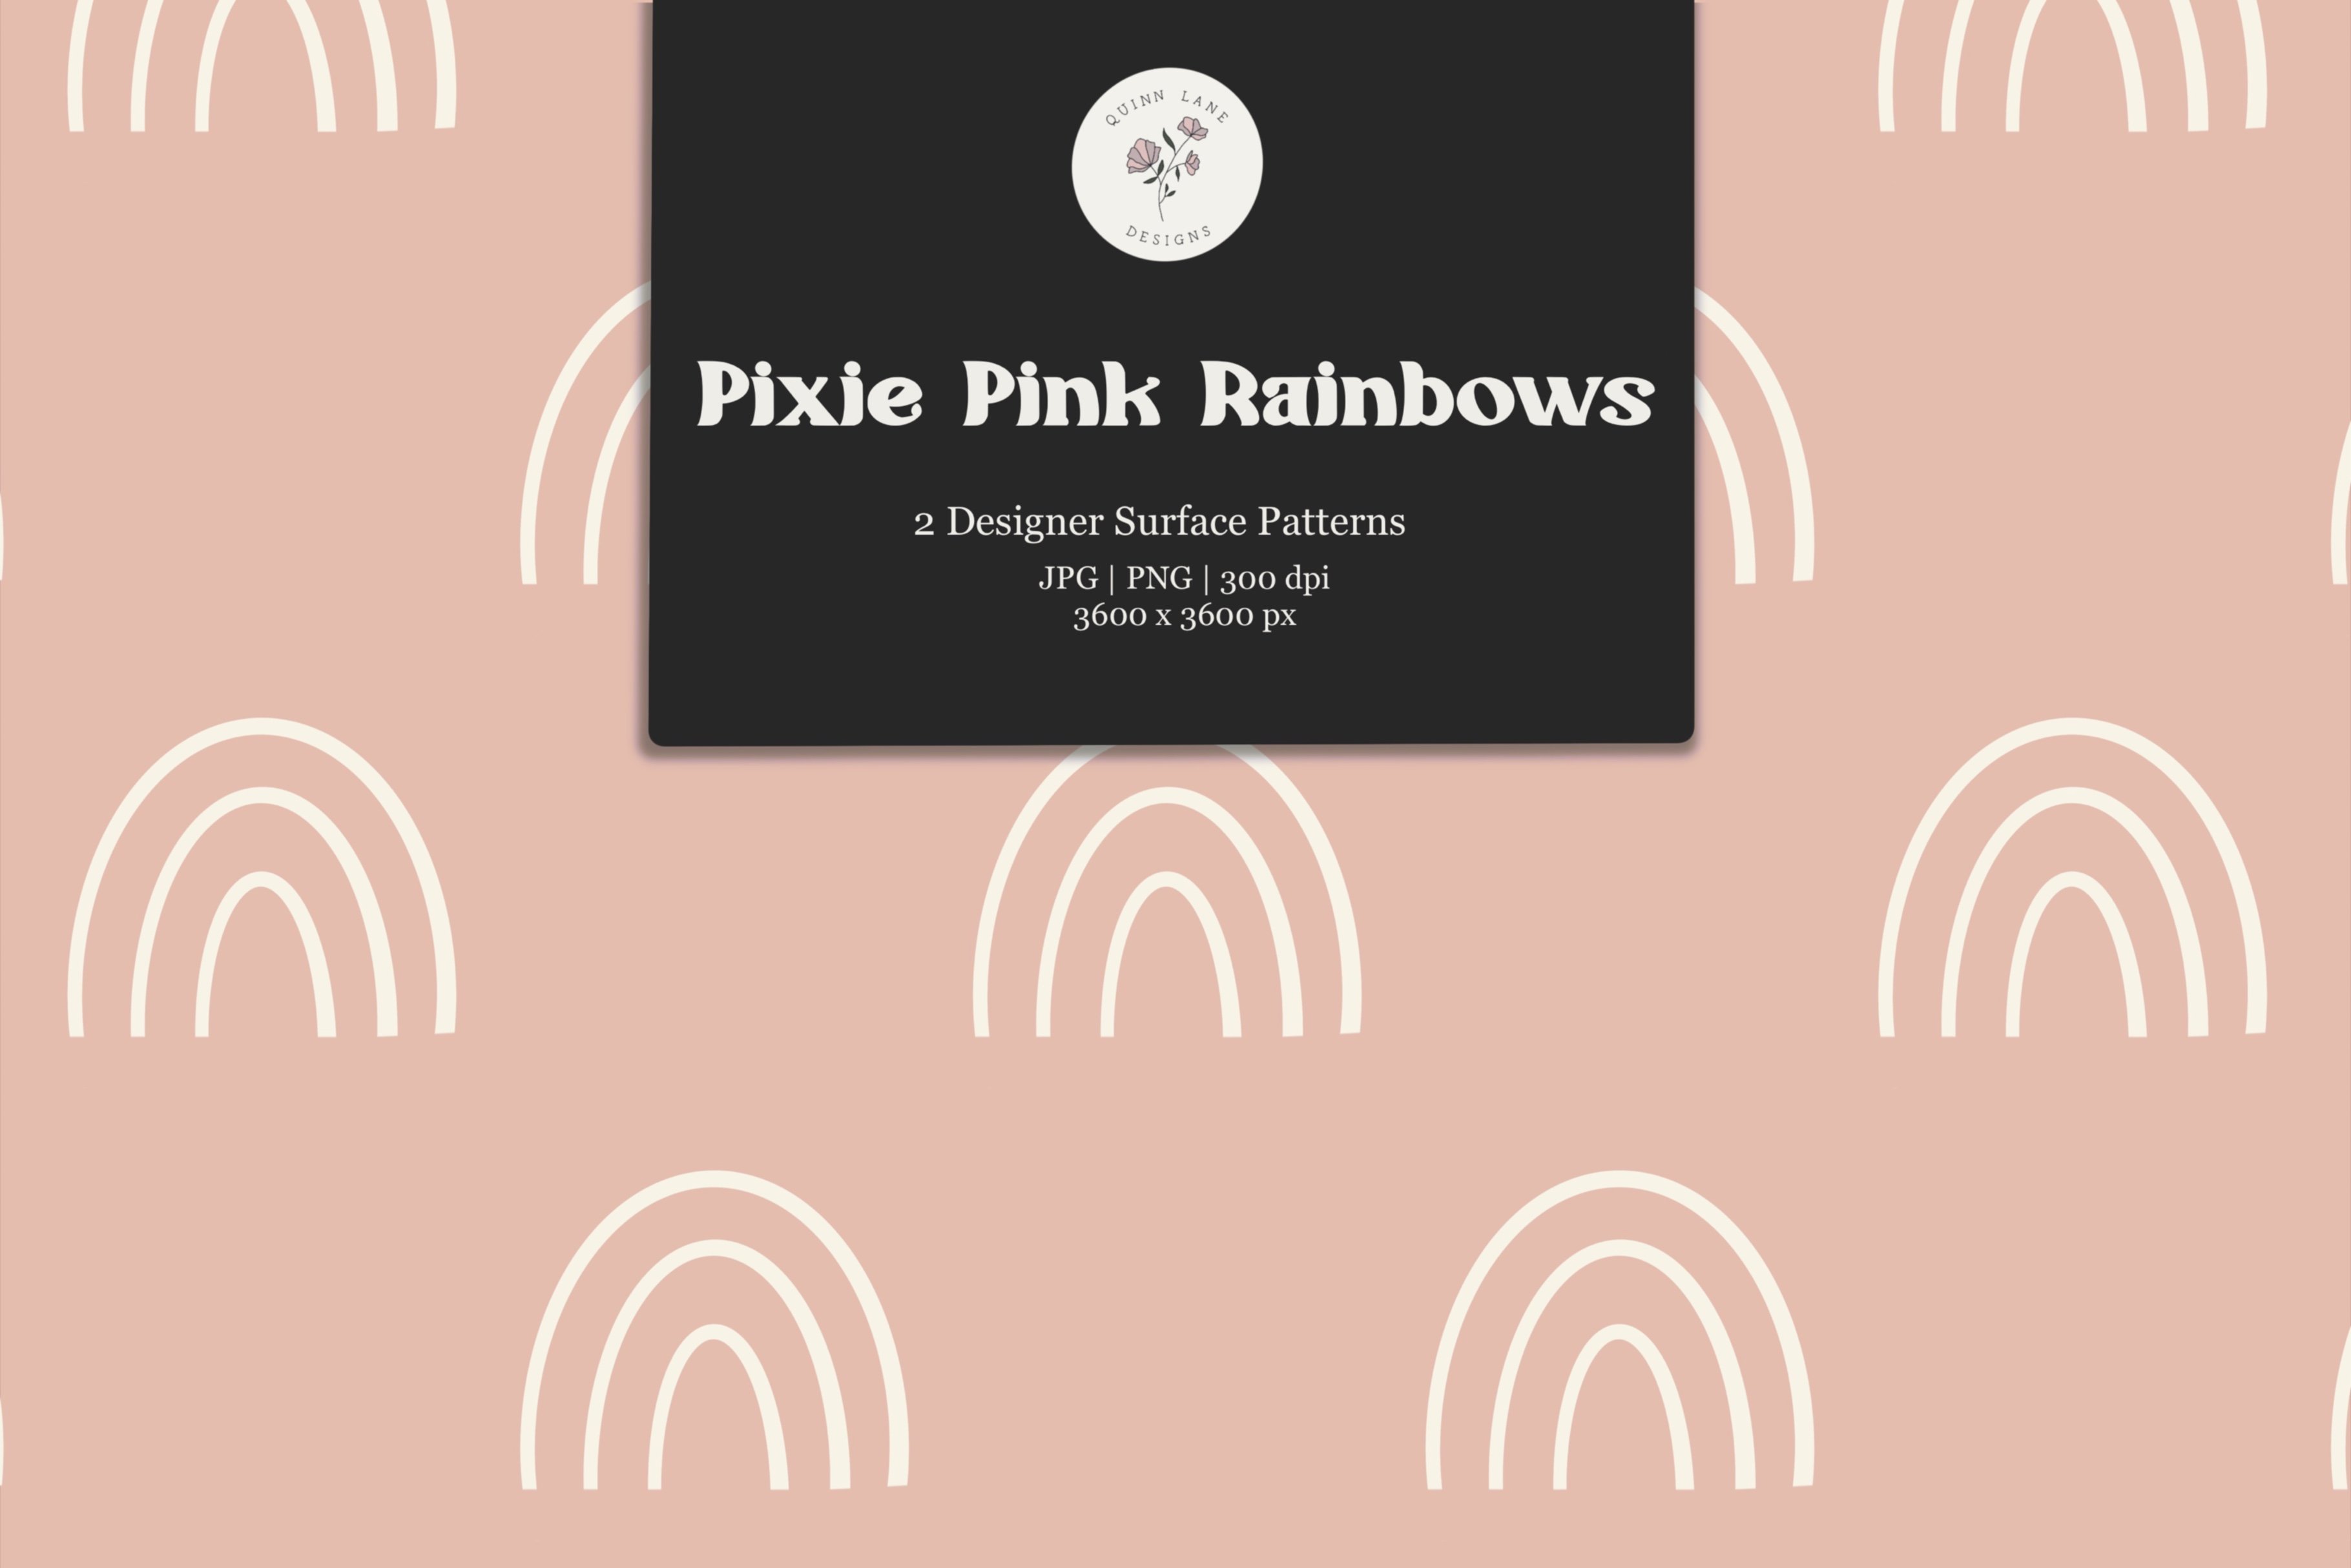 Pixie Pink Rainbow Surface Pattern cover image.